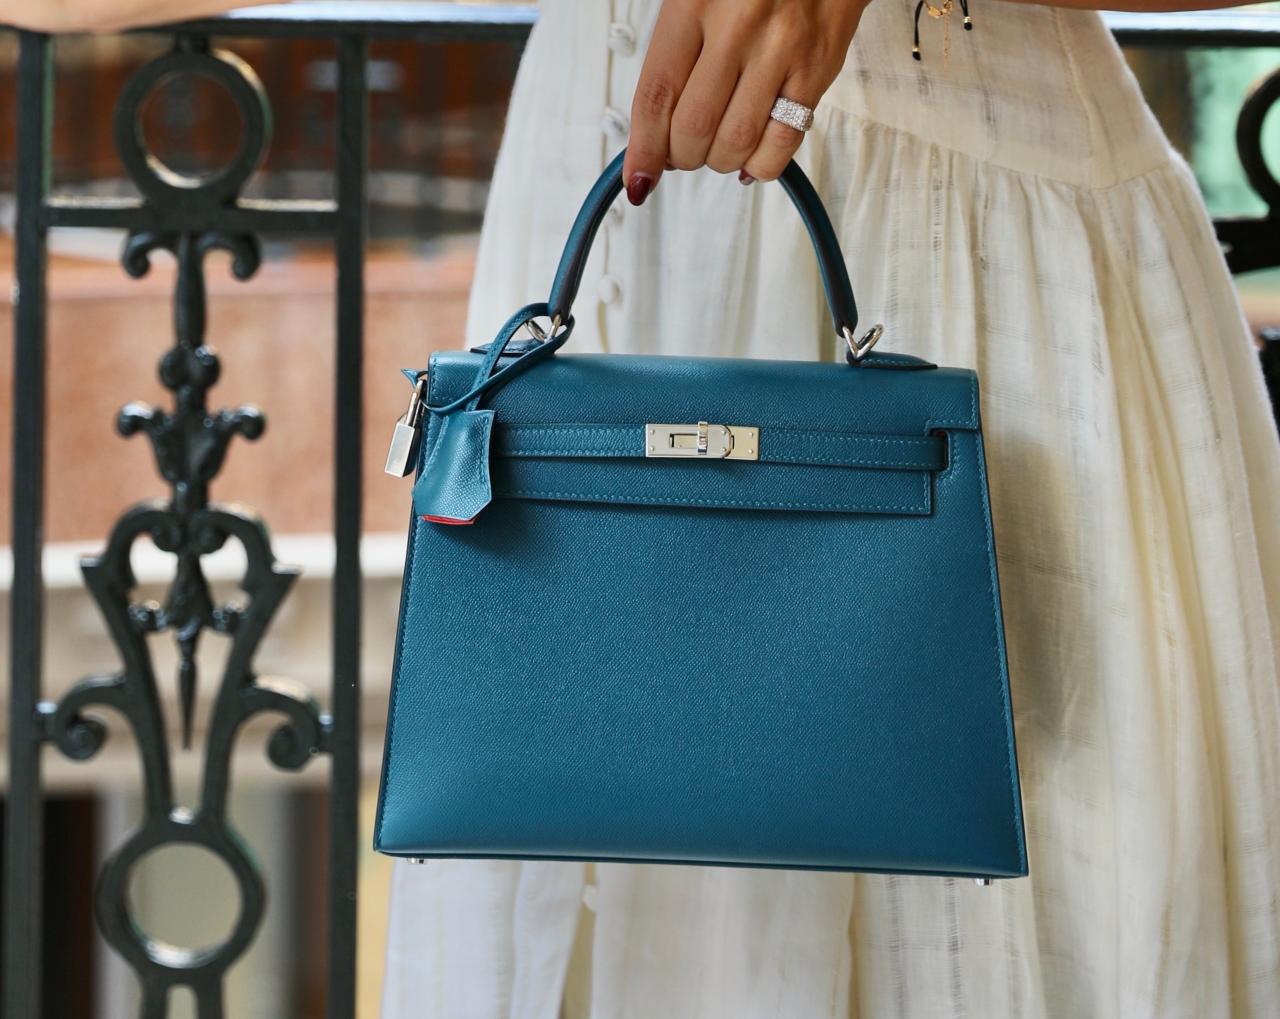 The Hermes Kelly bag. Estimated price: $8,650 - $9,100